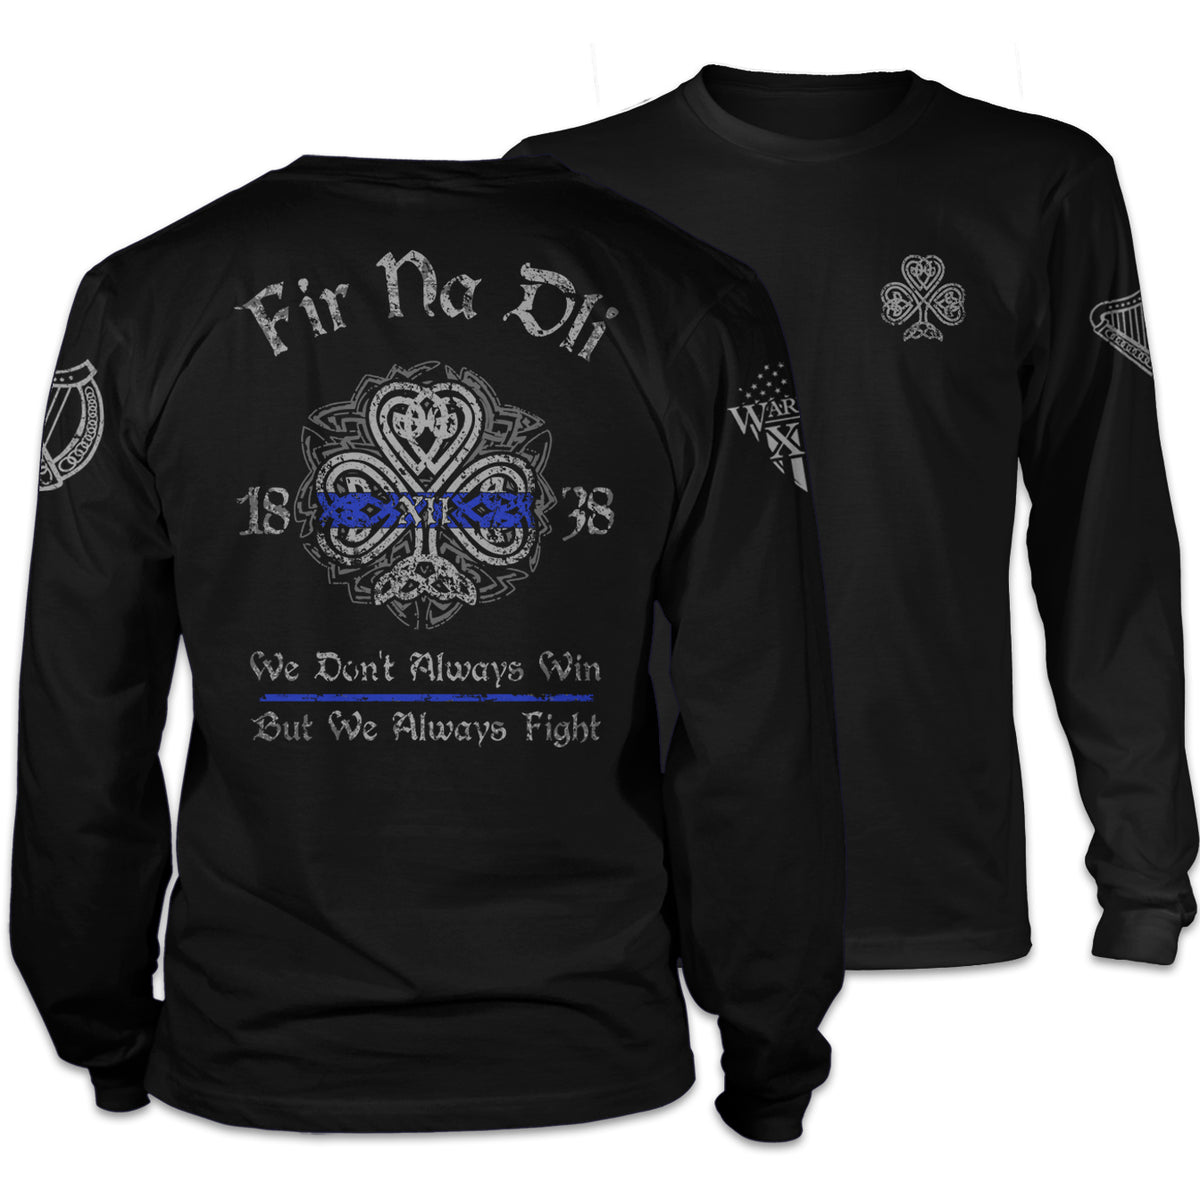 Front & back black long sleeve shirt paying tribute to history and traditions of Irish American Law Enforcement and showing true Celtic Pride. Fir Na Dli, meaning, men of law‚ in Gaelic, is written across the back.